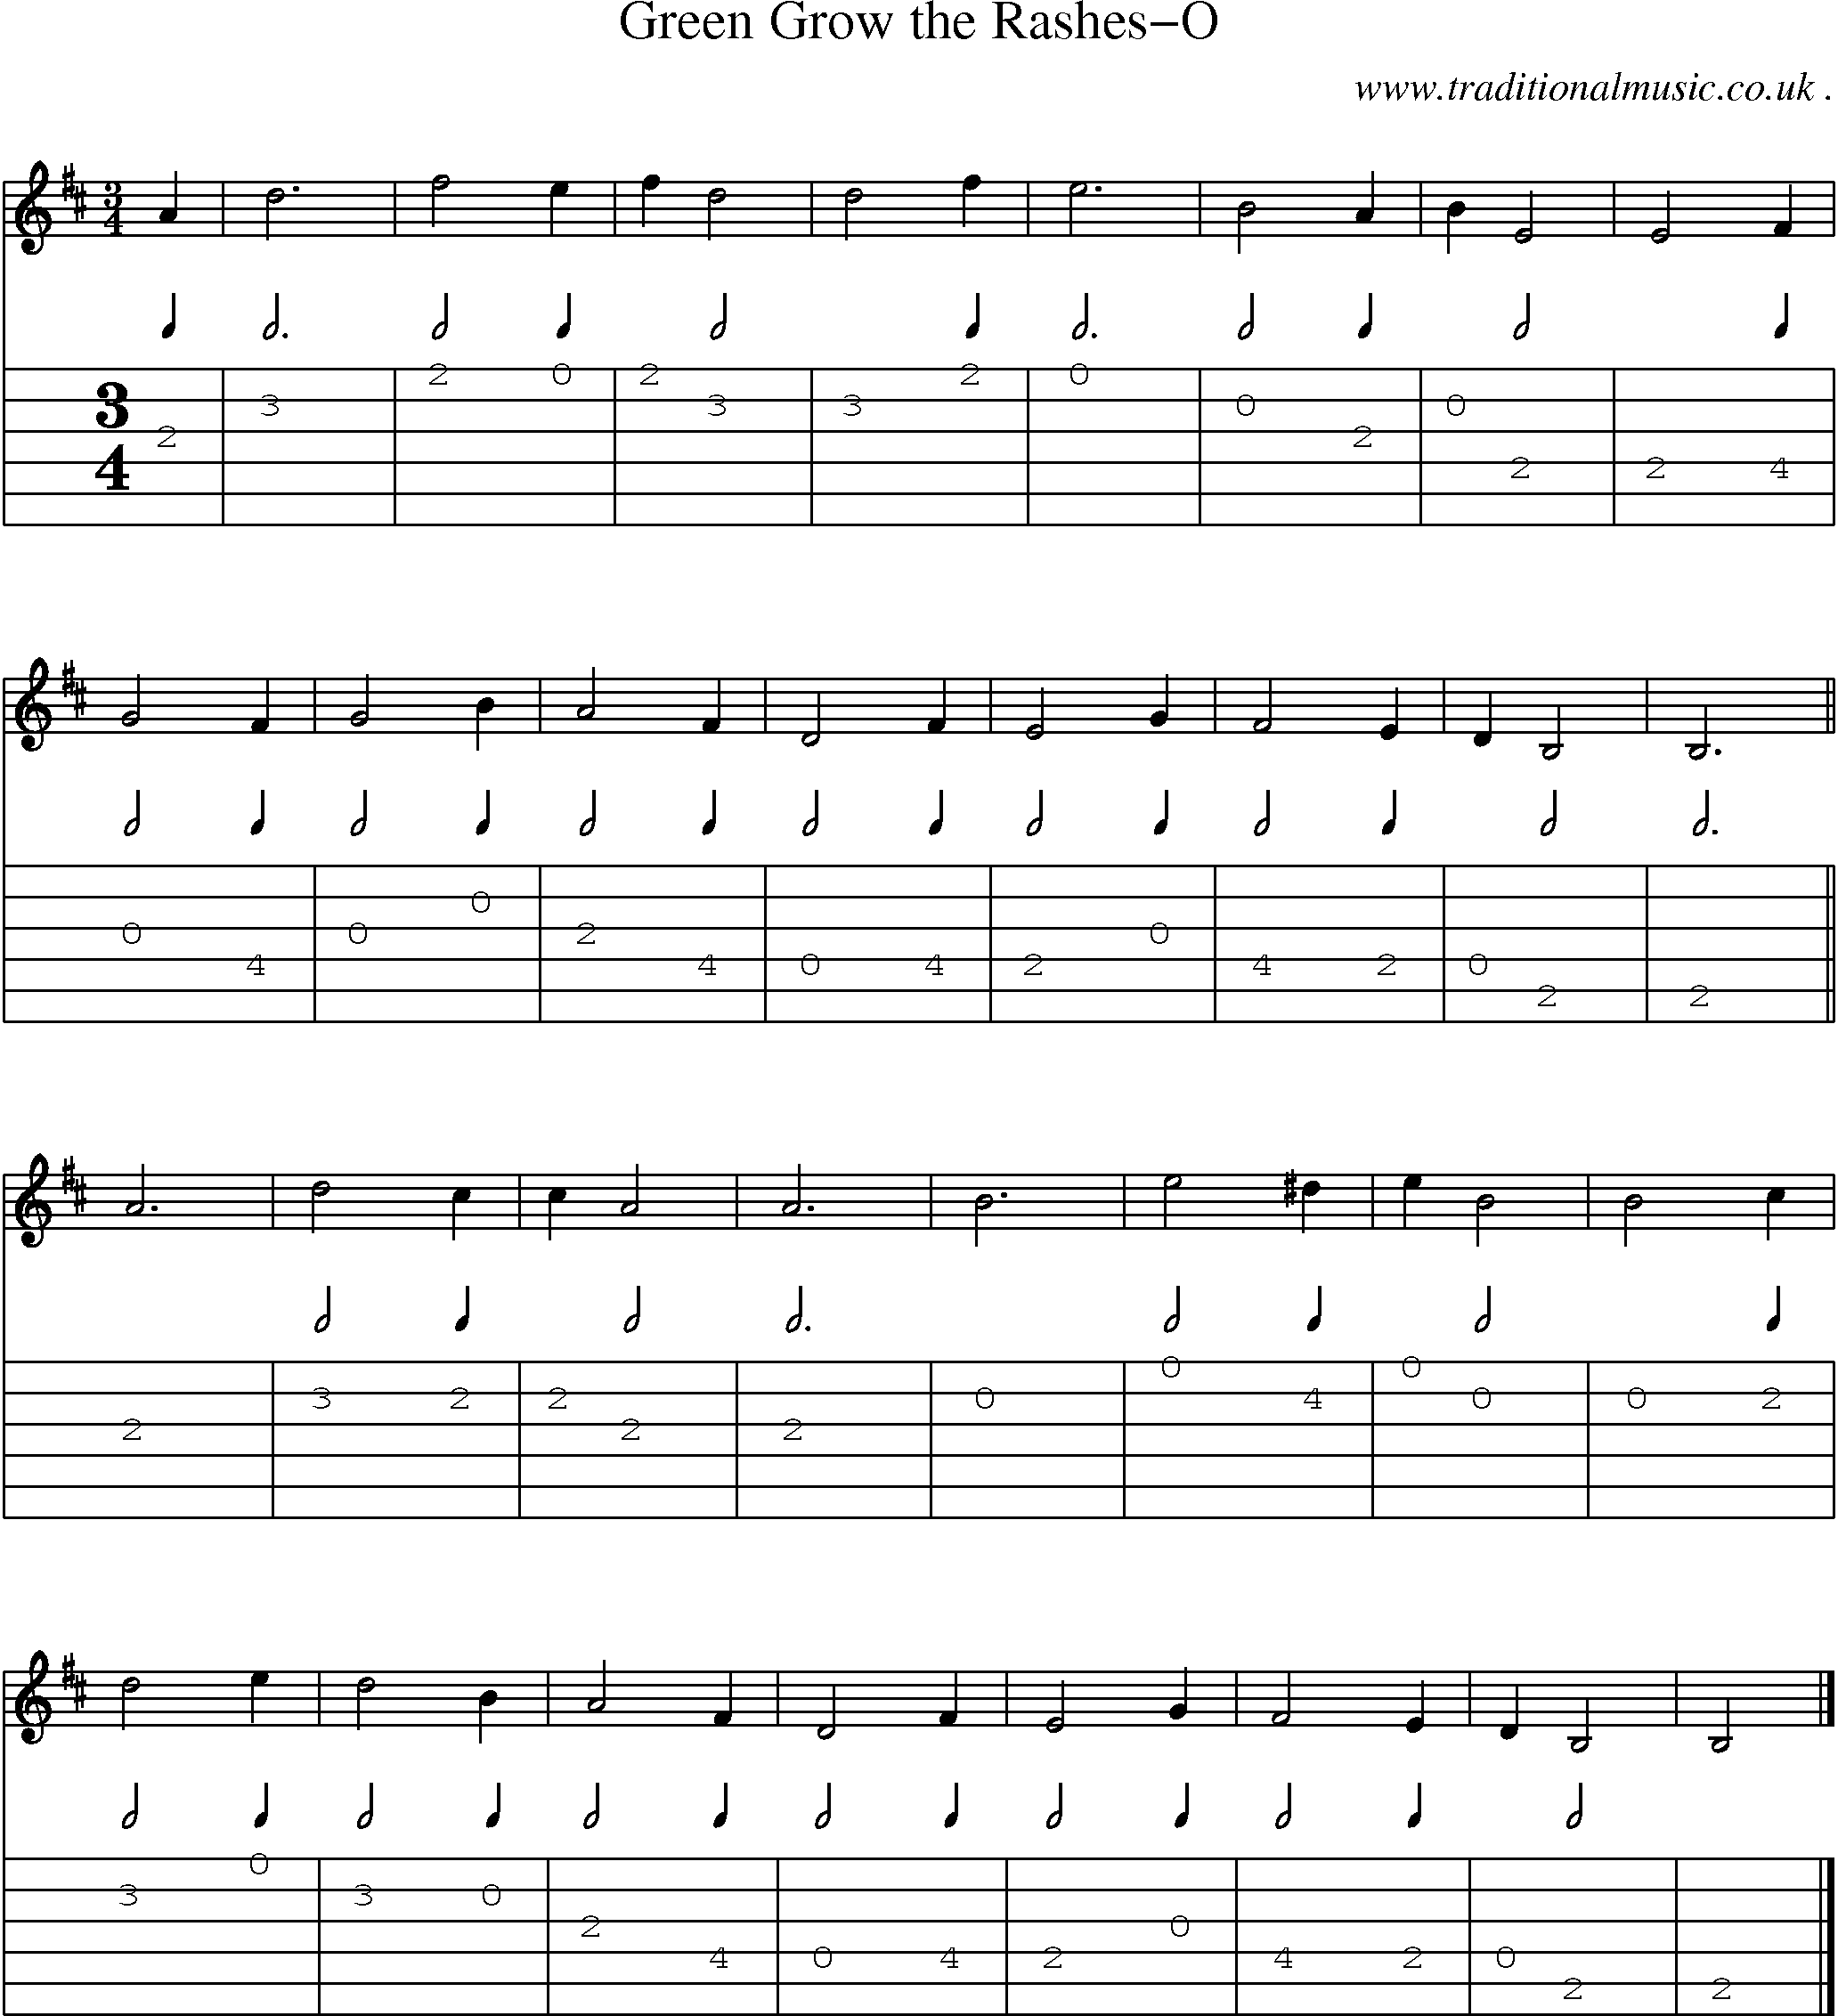 Sheet-music  score, Chords and Guitar Tabs for Green Grow The Rashes-o